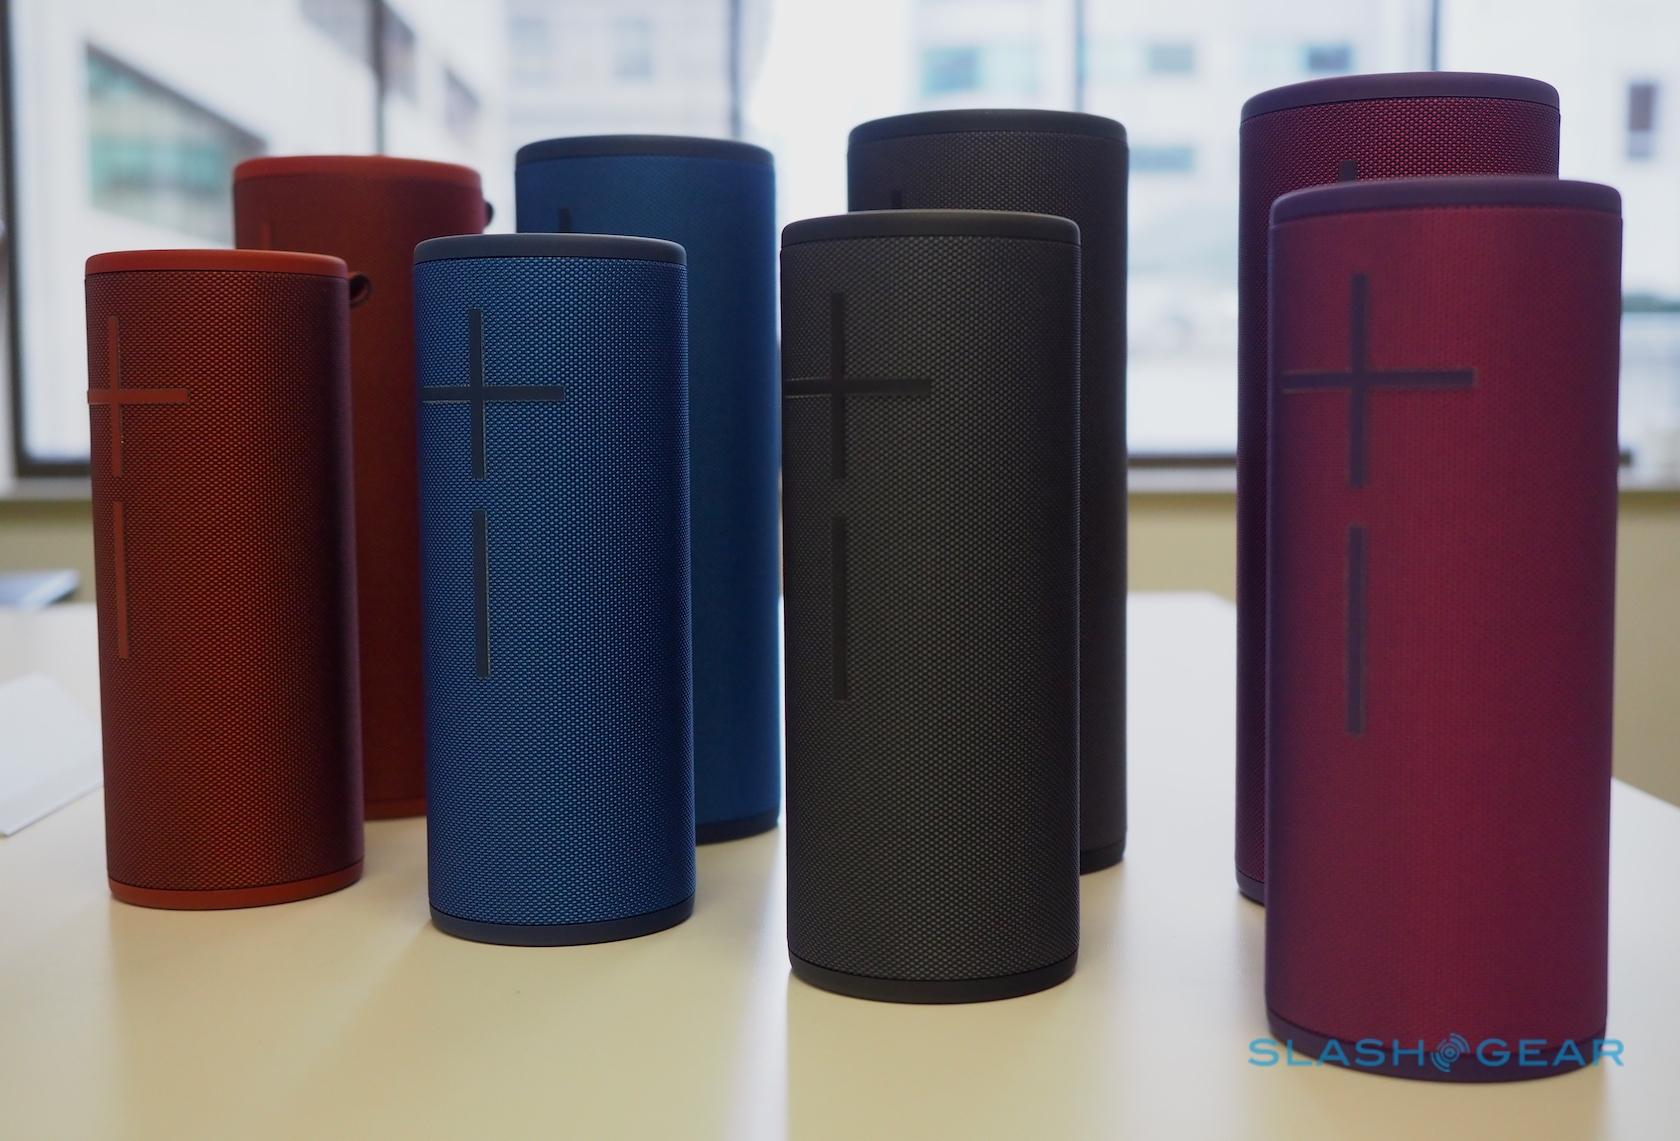 do you need the megaboom app to connect